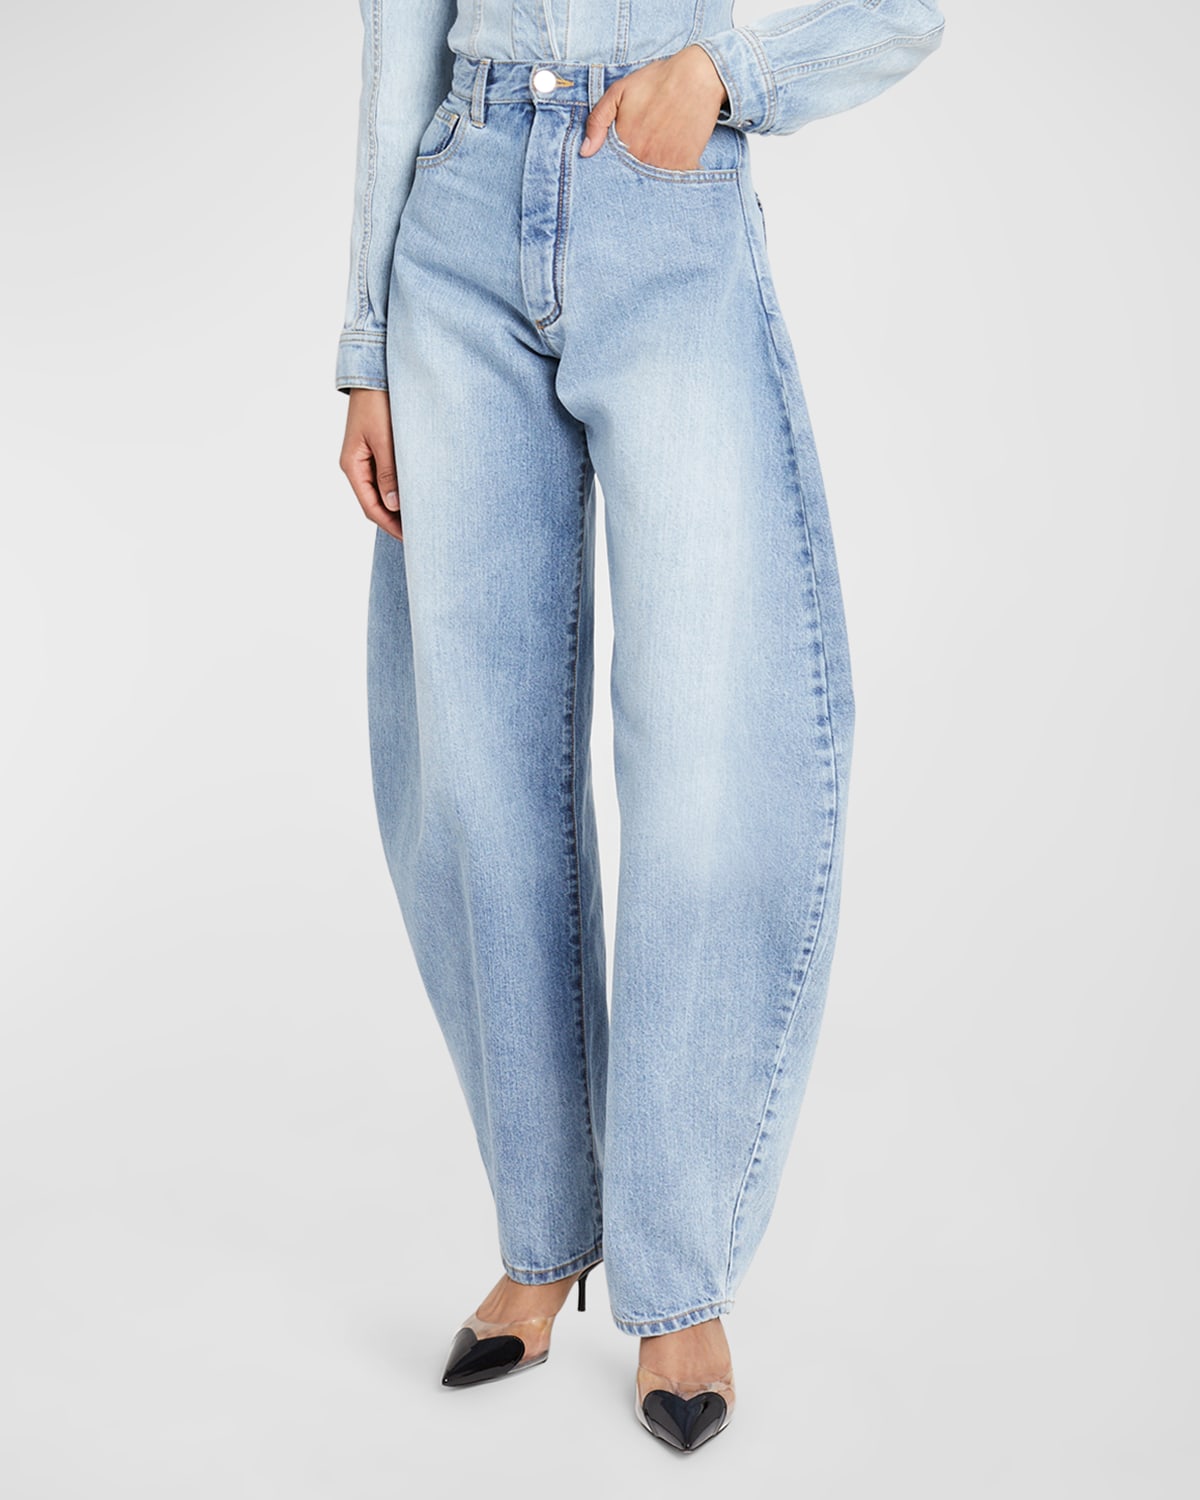 Exaggerated Rounded Wide-Leg Denim Jeans